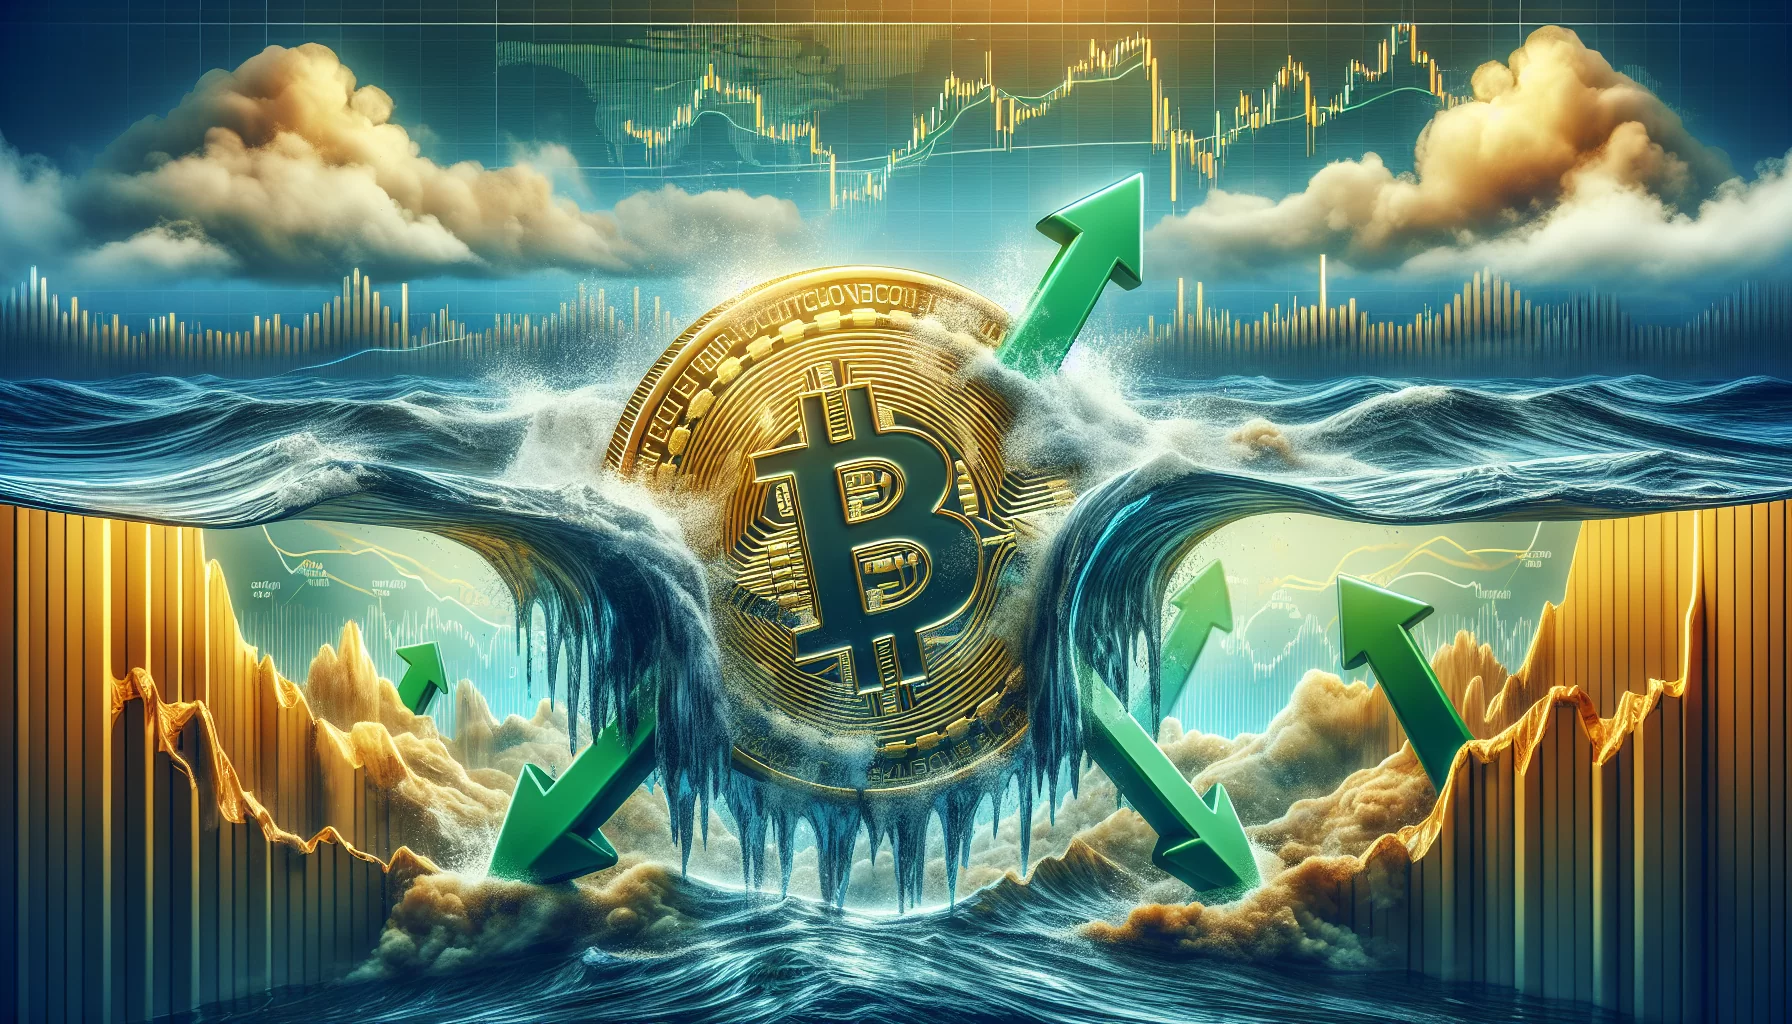 Bitcoin's recent dip: a market correction or cause for concern? Decoding the optimism of top traders